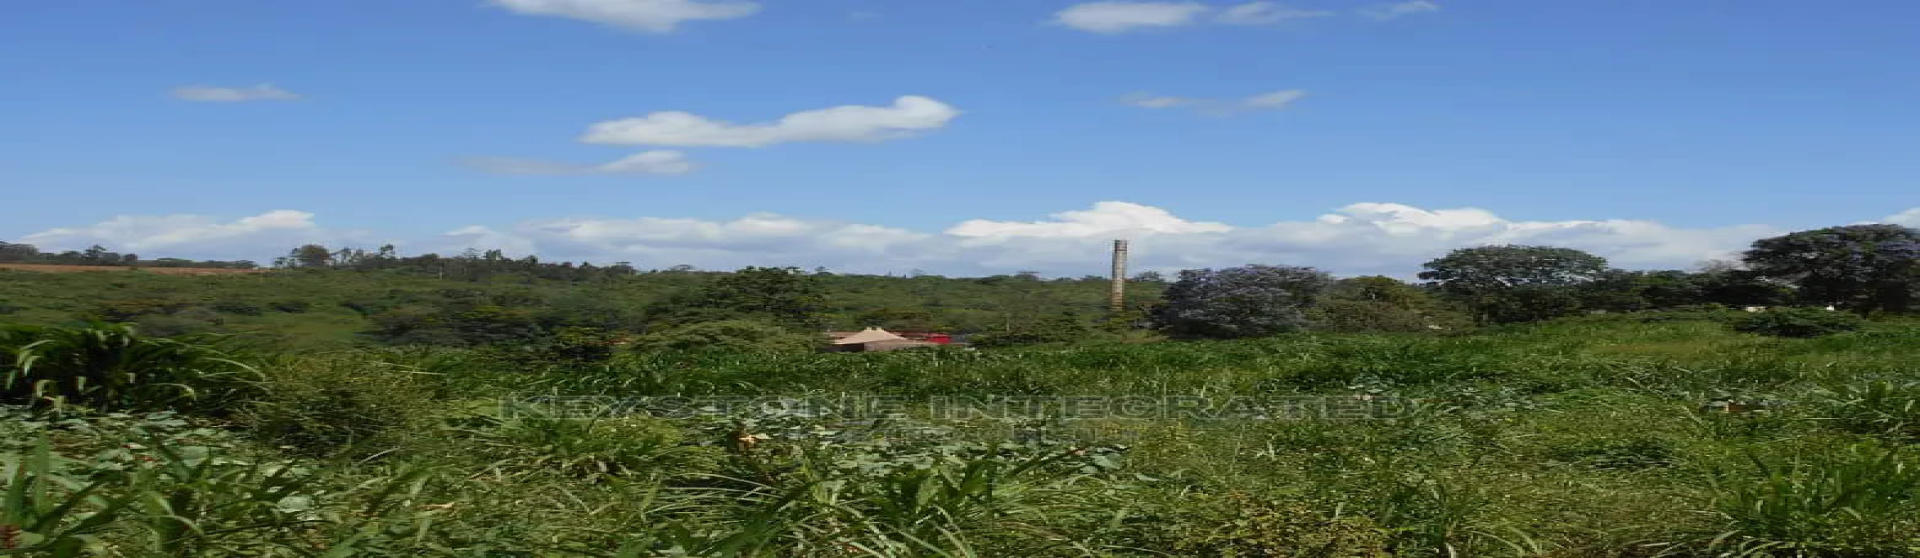 1/8 Acre Plot for Sale in Thika